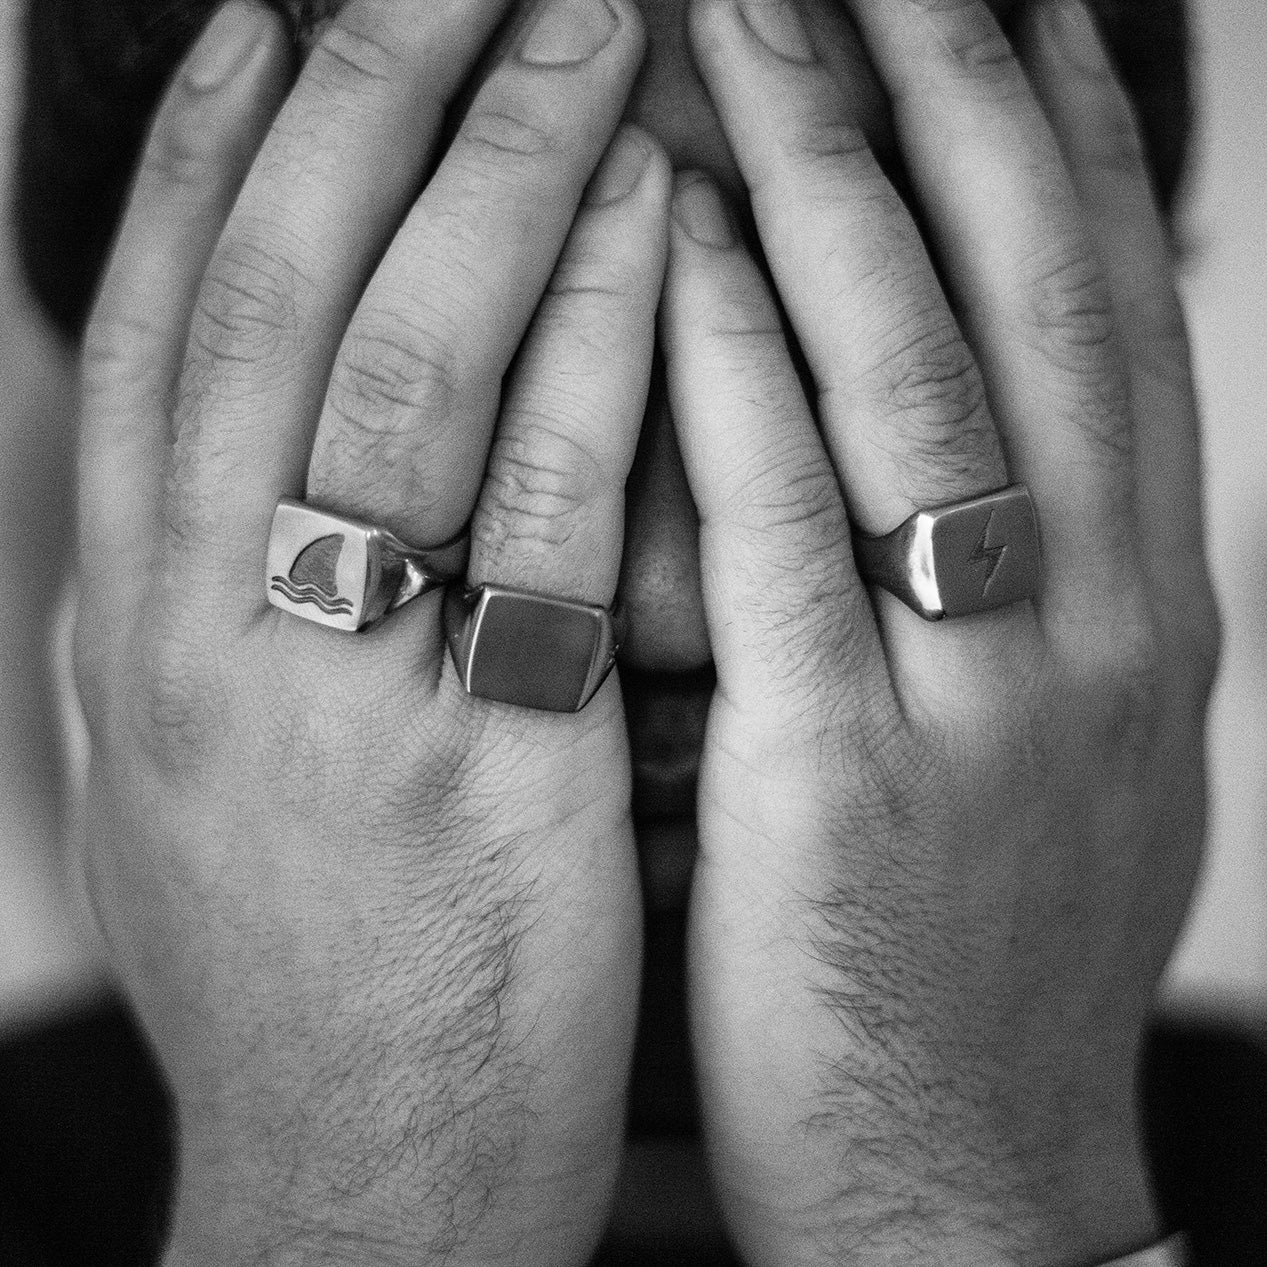 Two hands held in front a face while wearing two titanium signet rings on the left hand and one on the right hand.